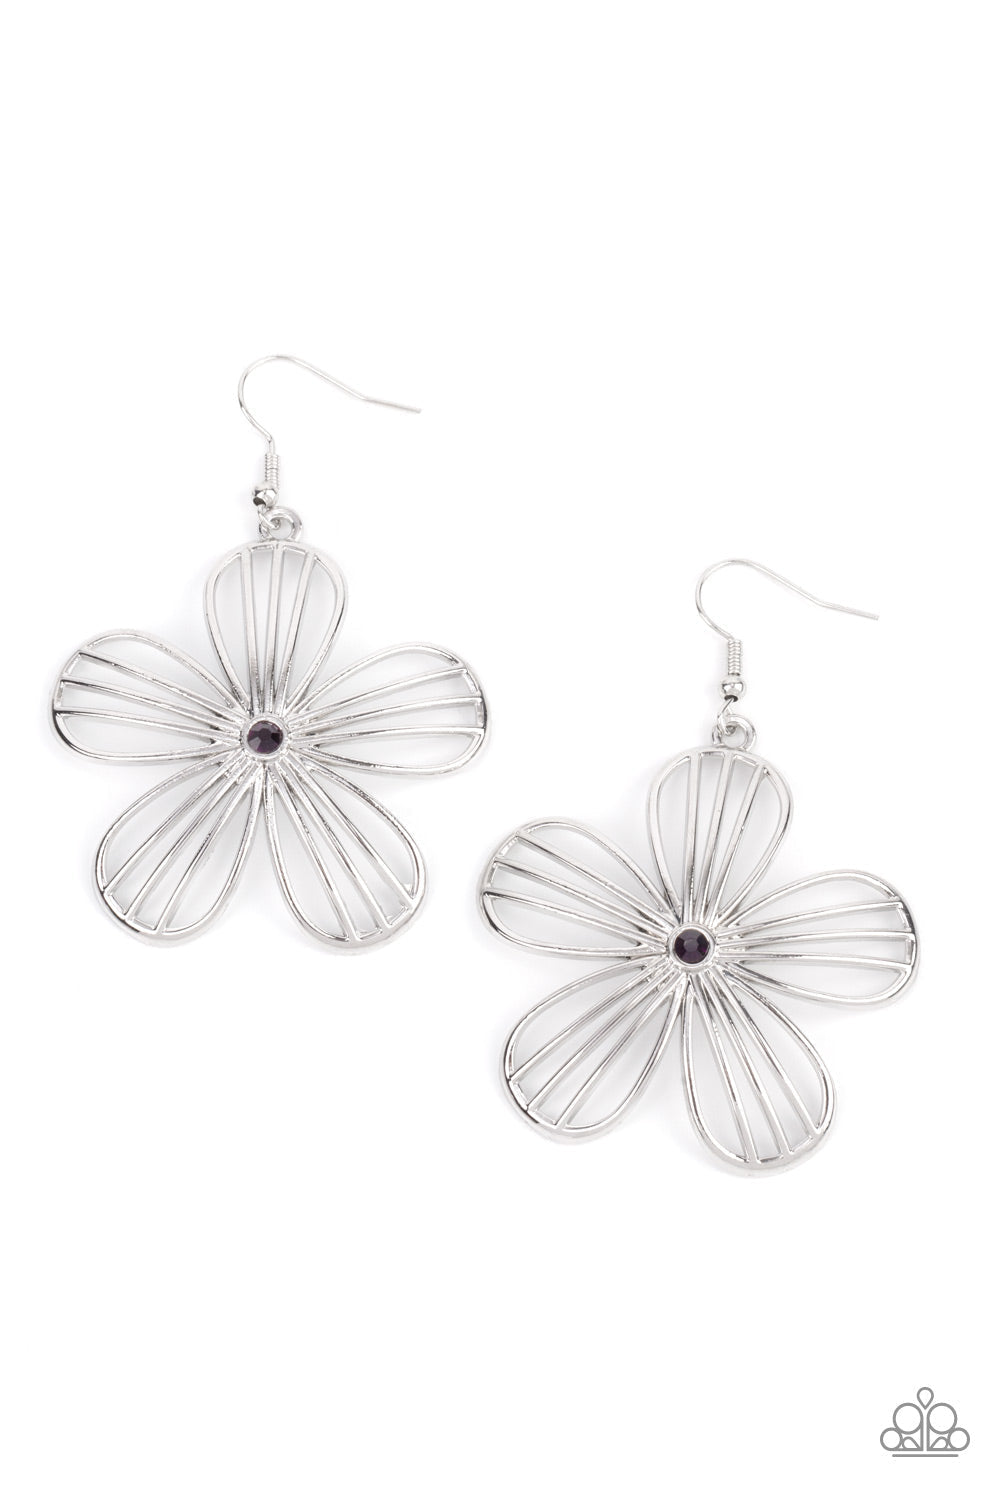 Meadow Musical - Purple and Silver - Floral Earrings - Paparazzi Accessories - Dainty purple rhinestone, airy silver petals streaked with linear bars bloom into an enchanting floral frame.